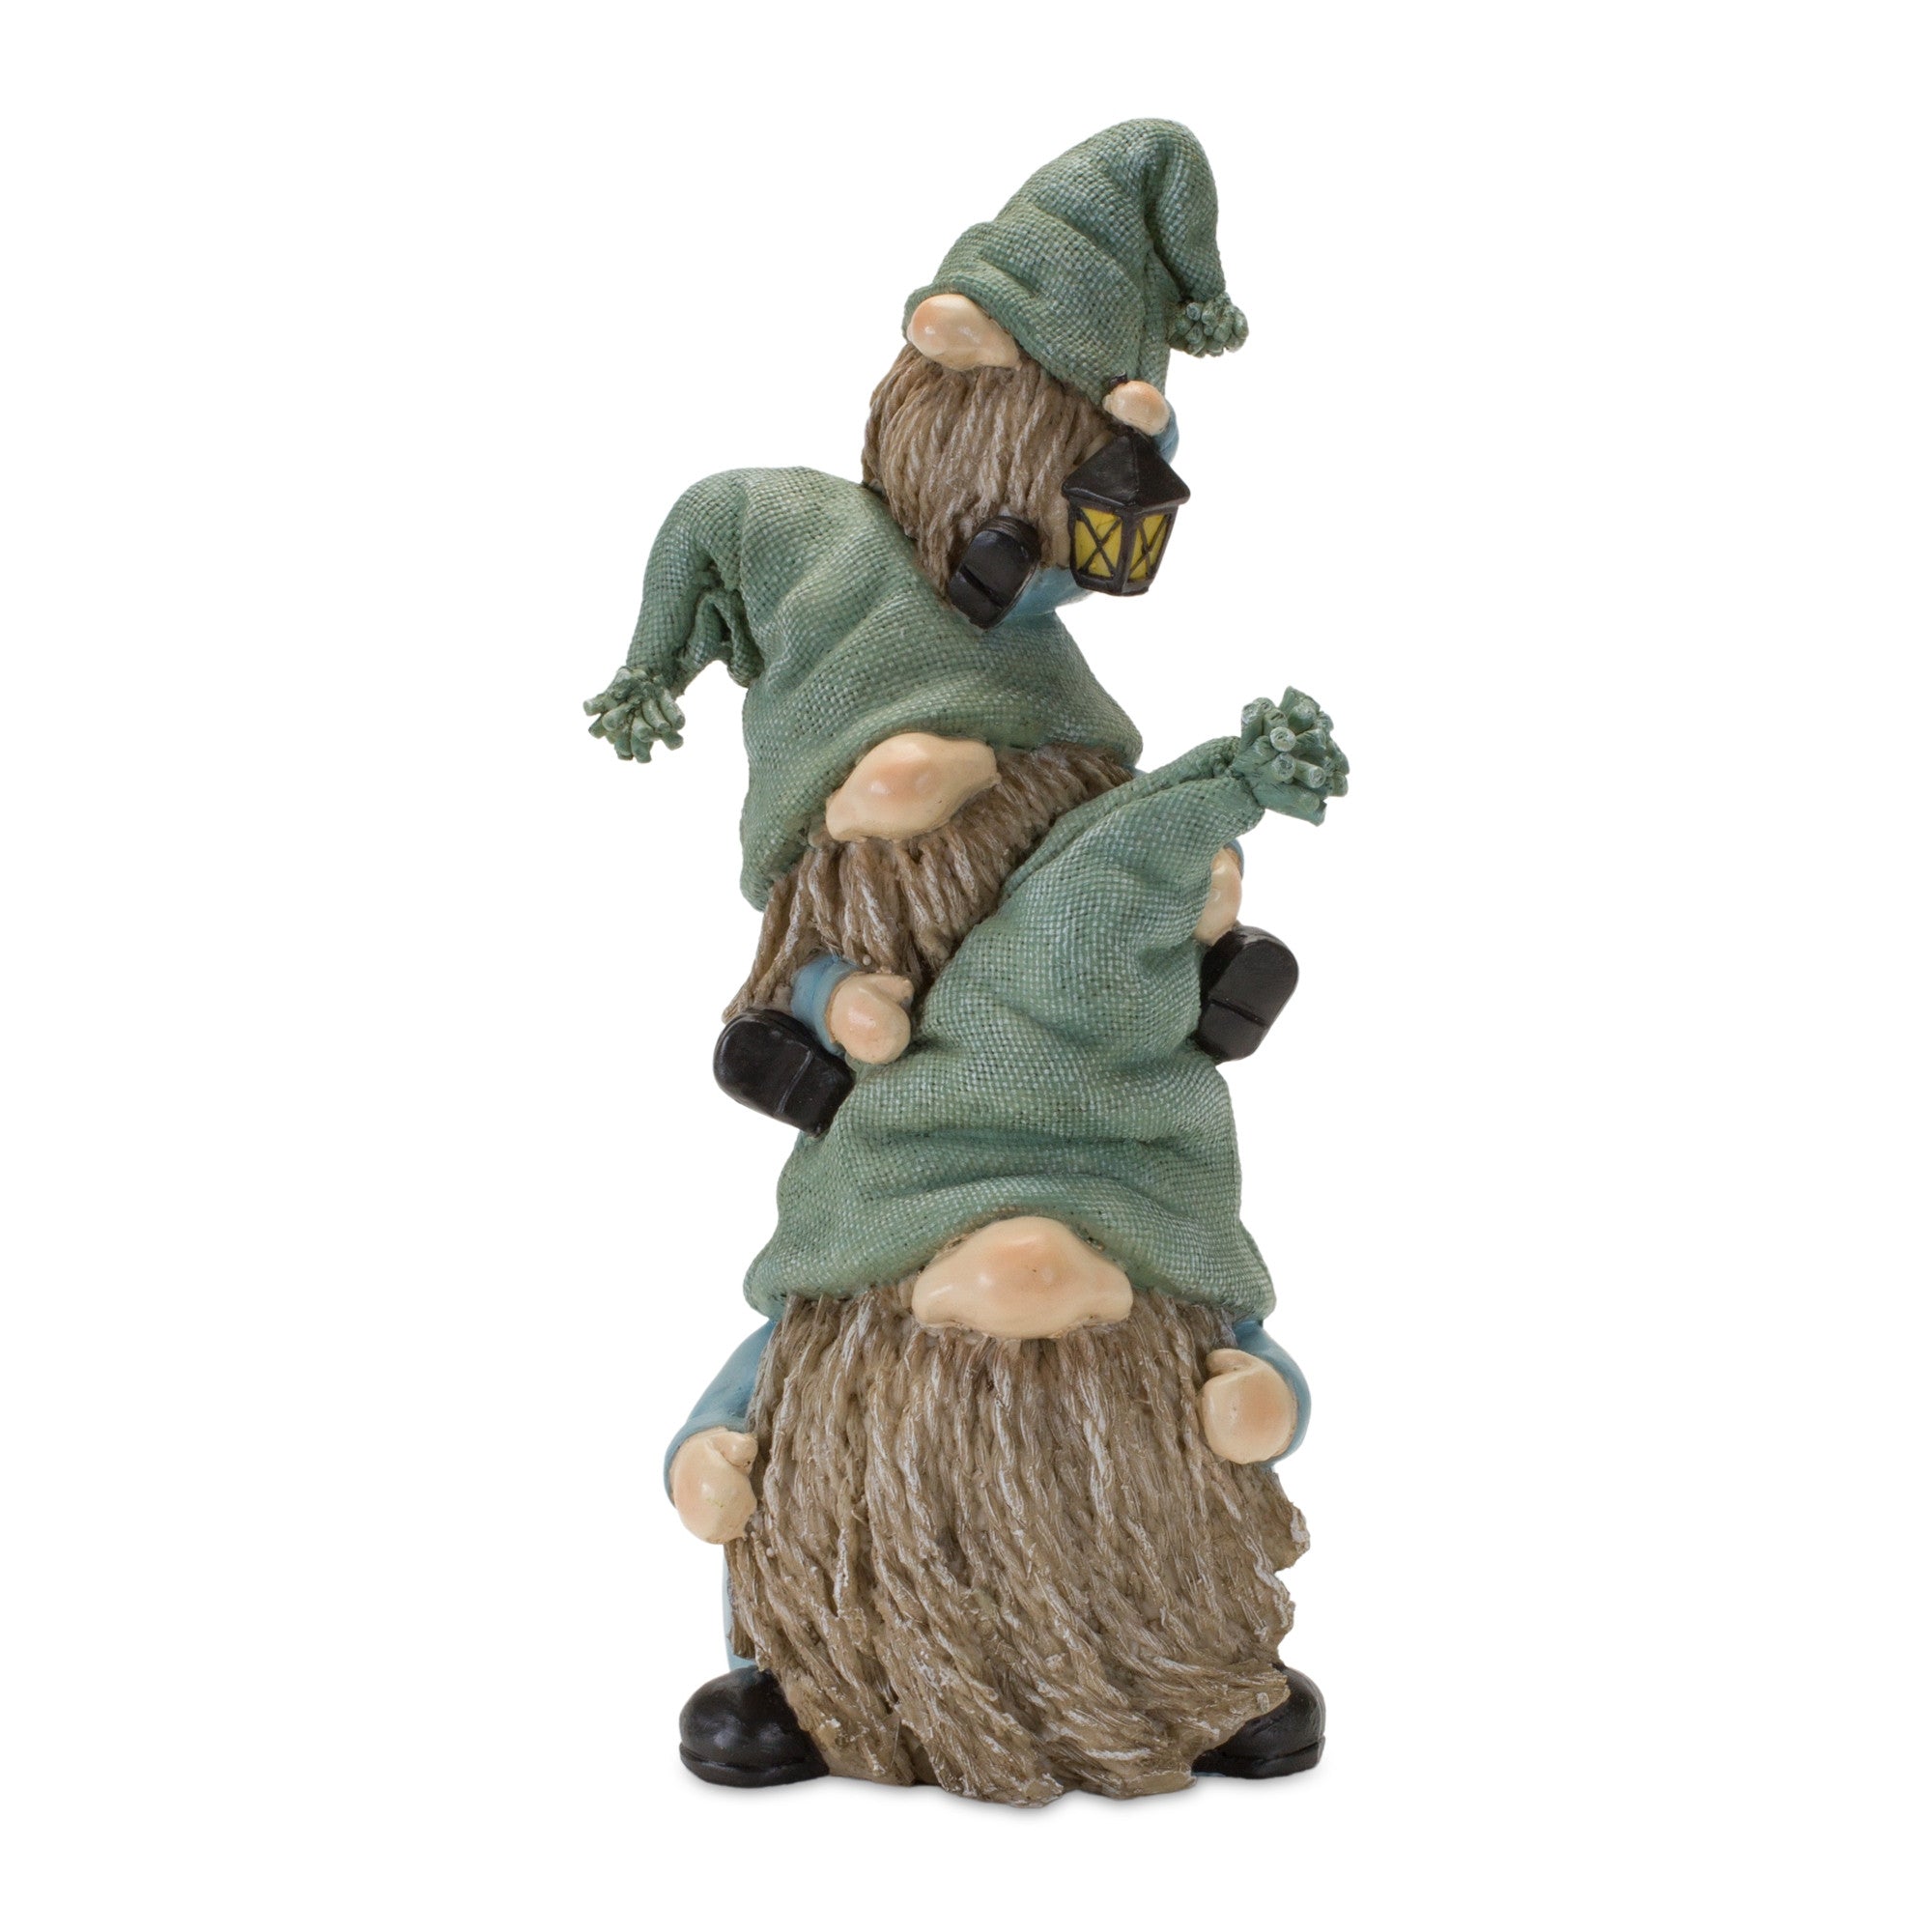 Set of Two 11" Blue and Green Polyresin Other Fantasy Sci-Fi Sitting Gnome Tabletop Sculpture